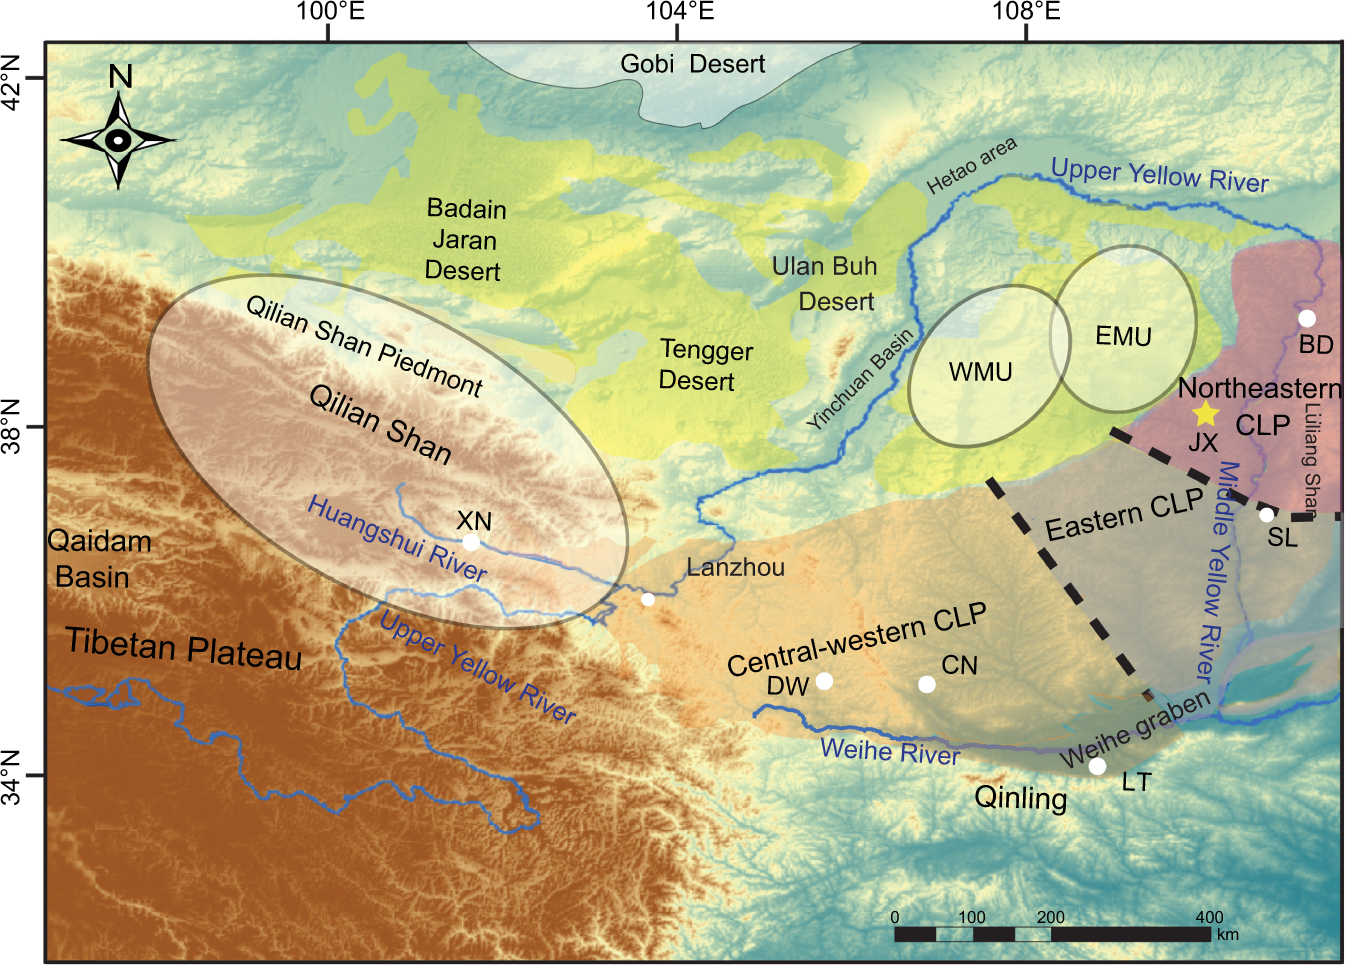 Stepwise increased spatial provenance contrast on the Chinese Loess Plateau  over late Miocene-Pleistocene | Communications Earth & Environment